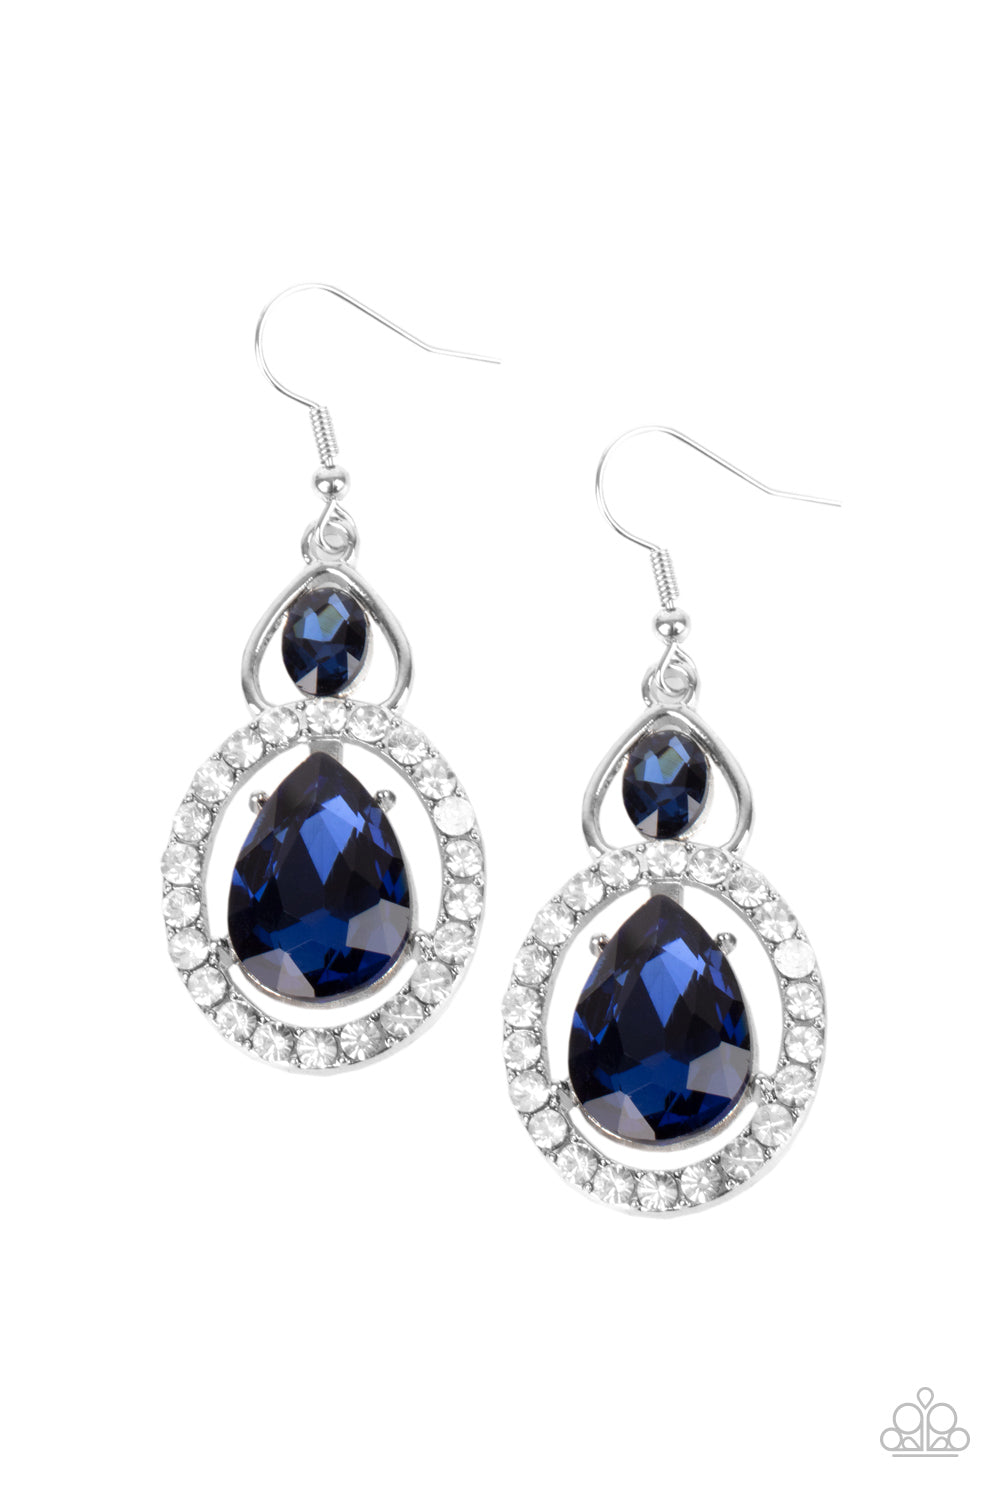 Paparazzi Accessories - Double The Drama - Blue Earrings